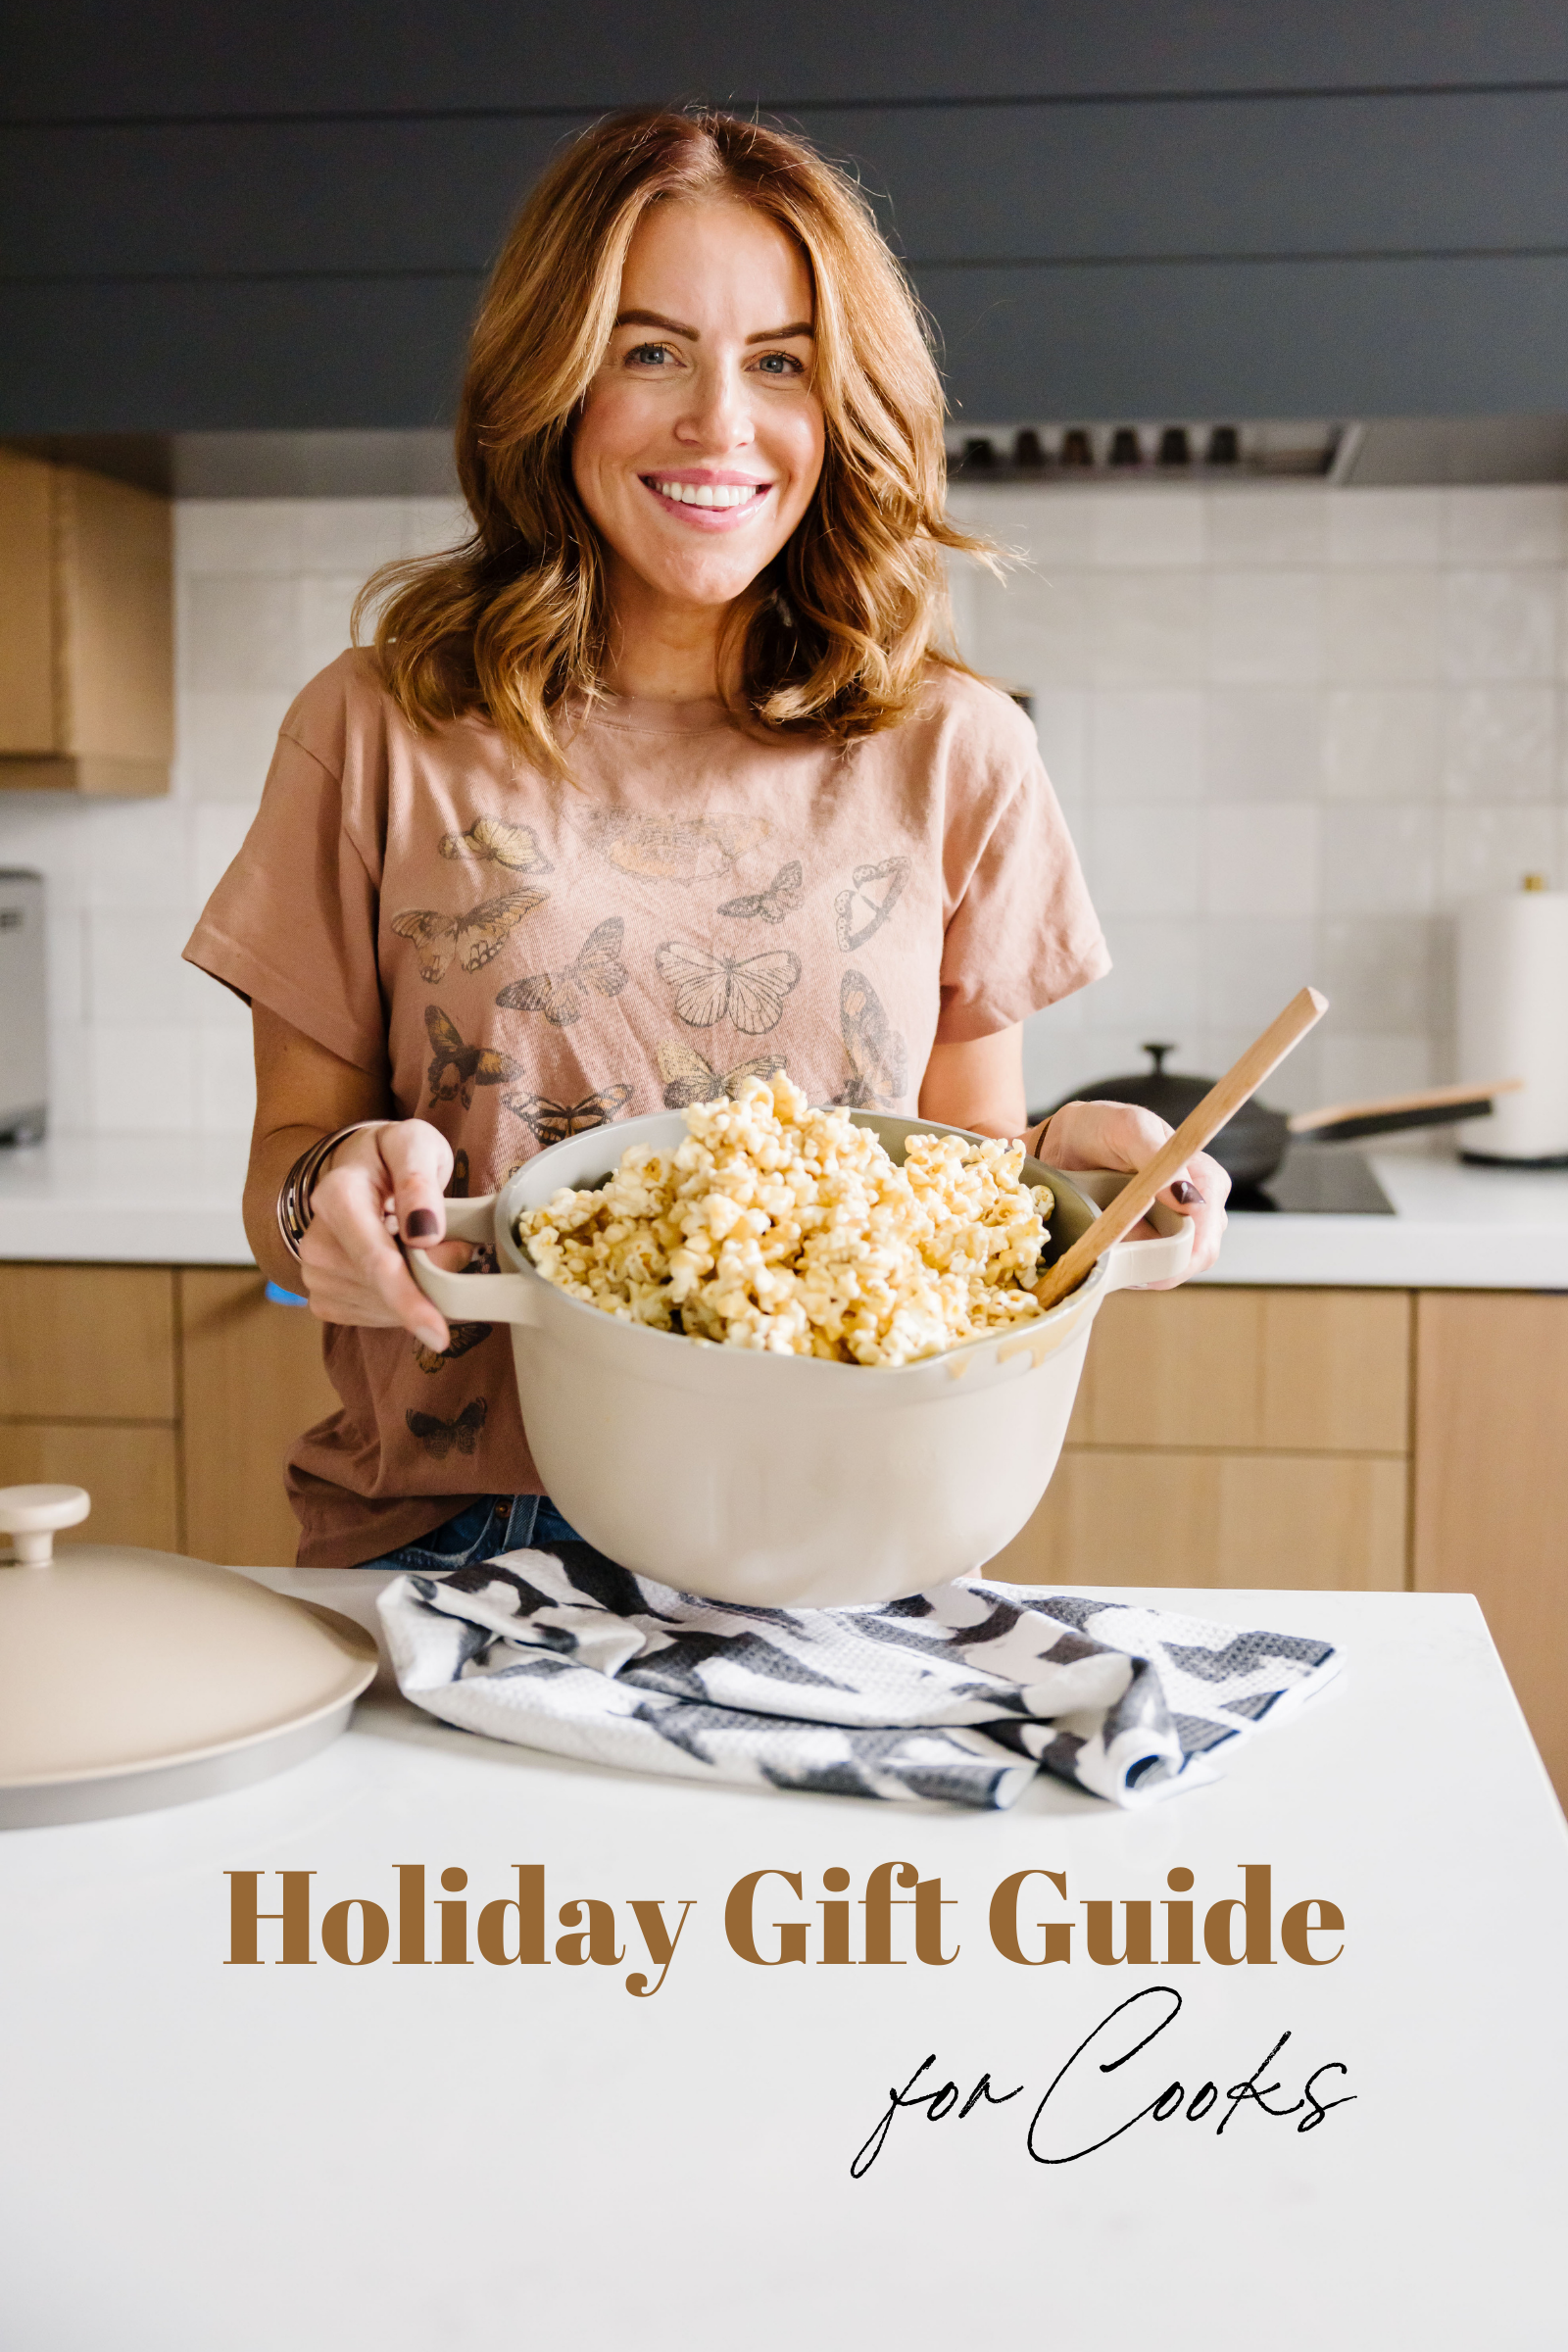 Holiday Gift Guide for Cooks 2020 – Tara Thueson